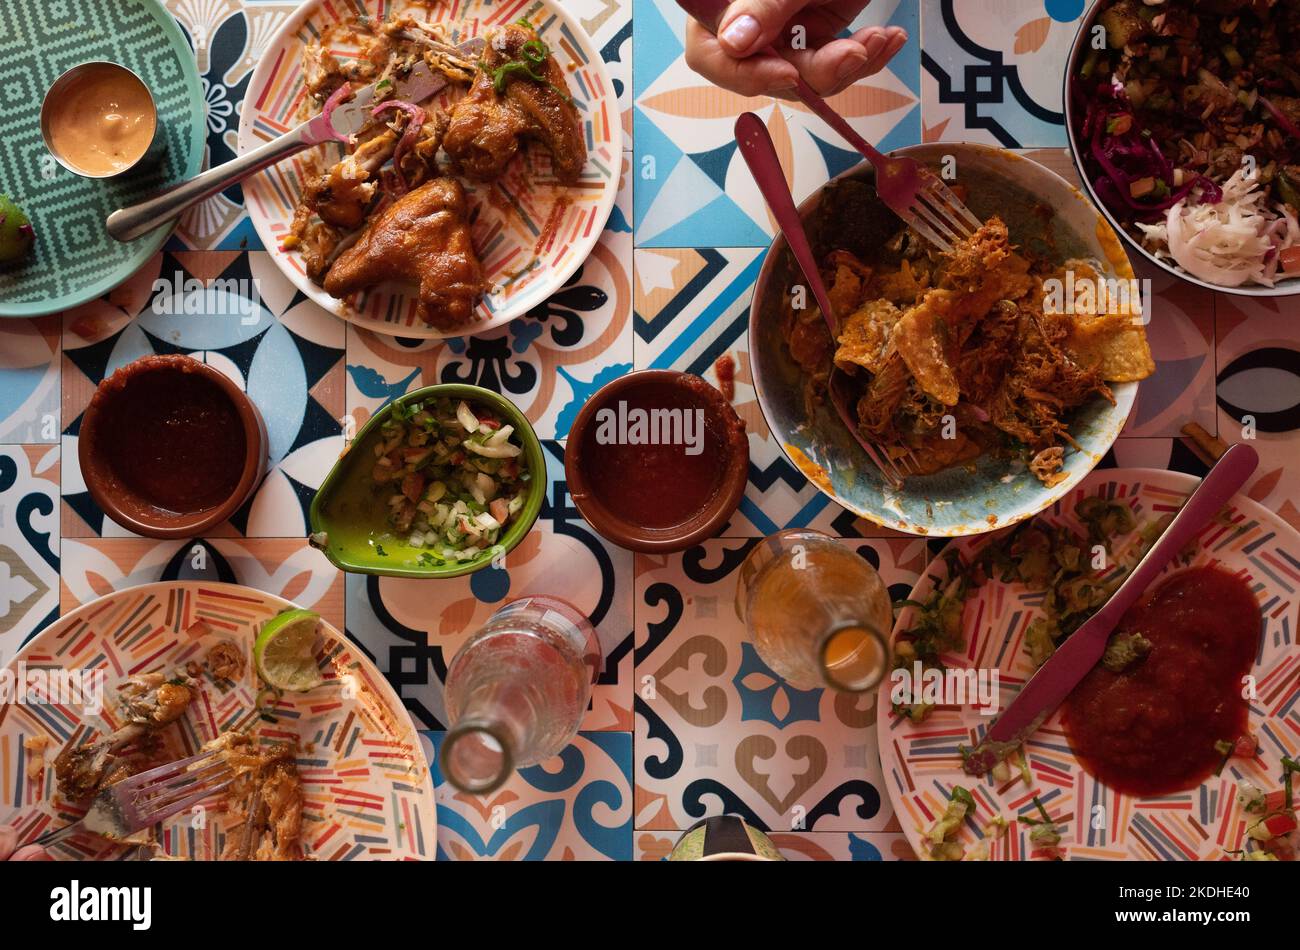 authentic Mexican food on a table at a party Stock Photo